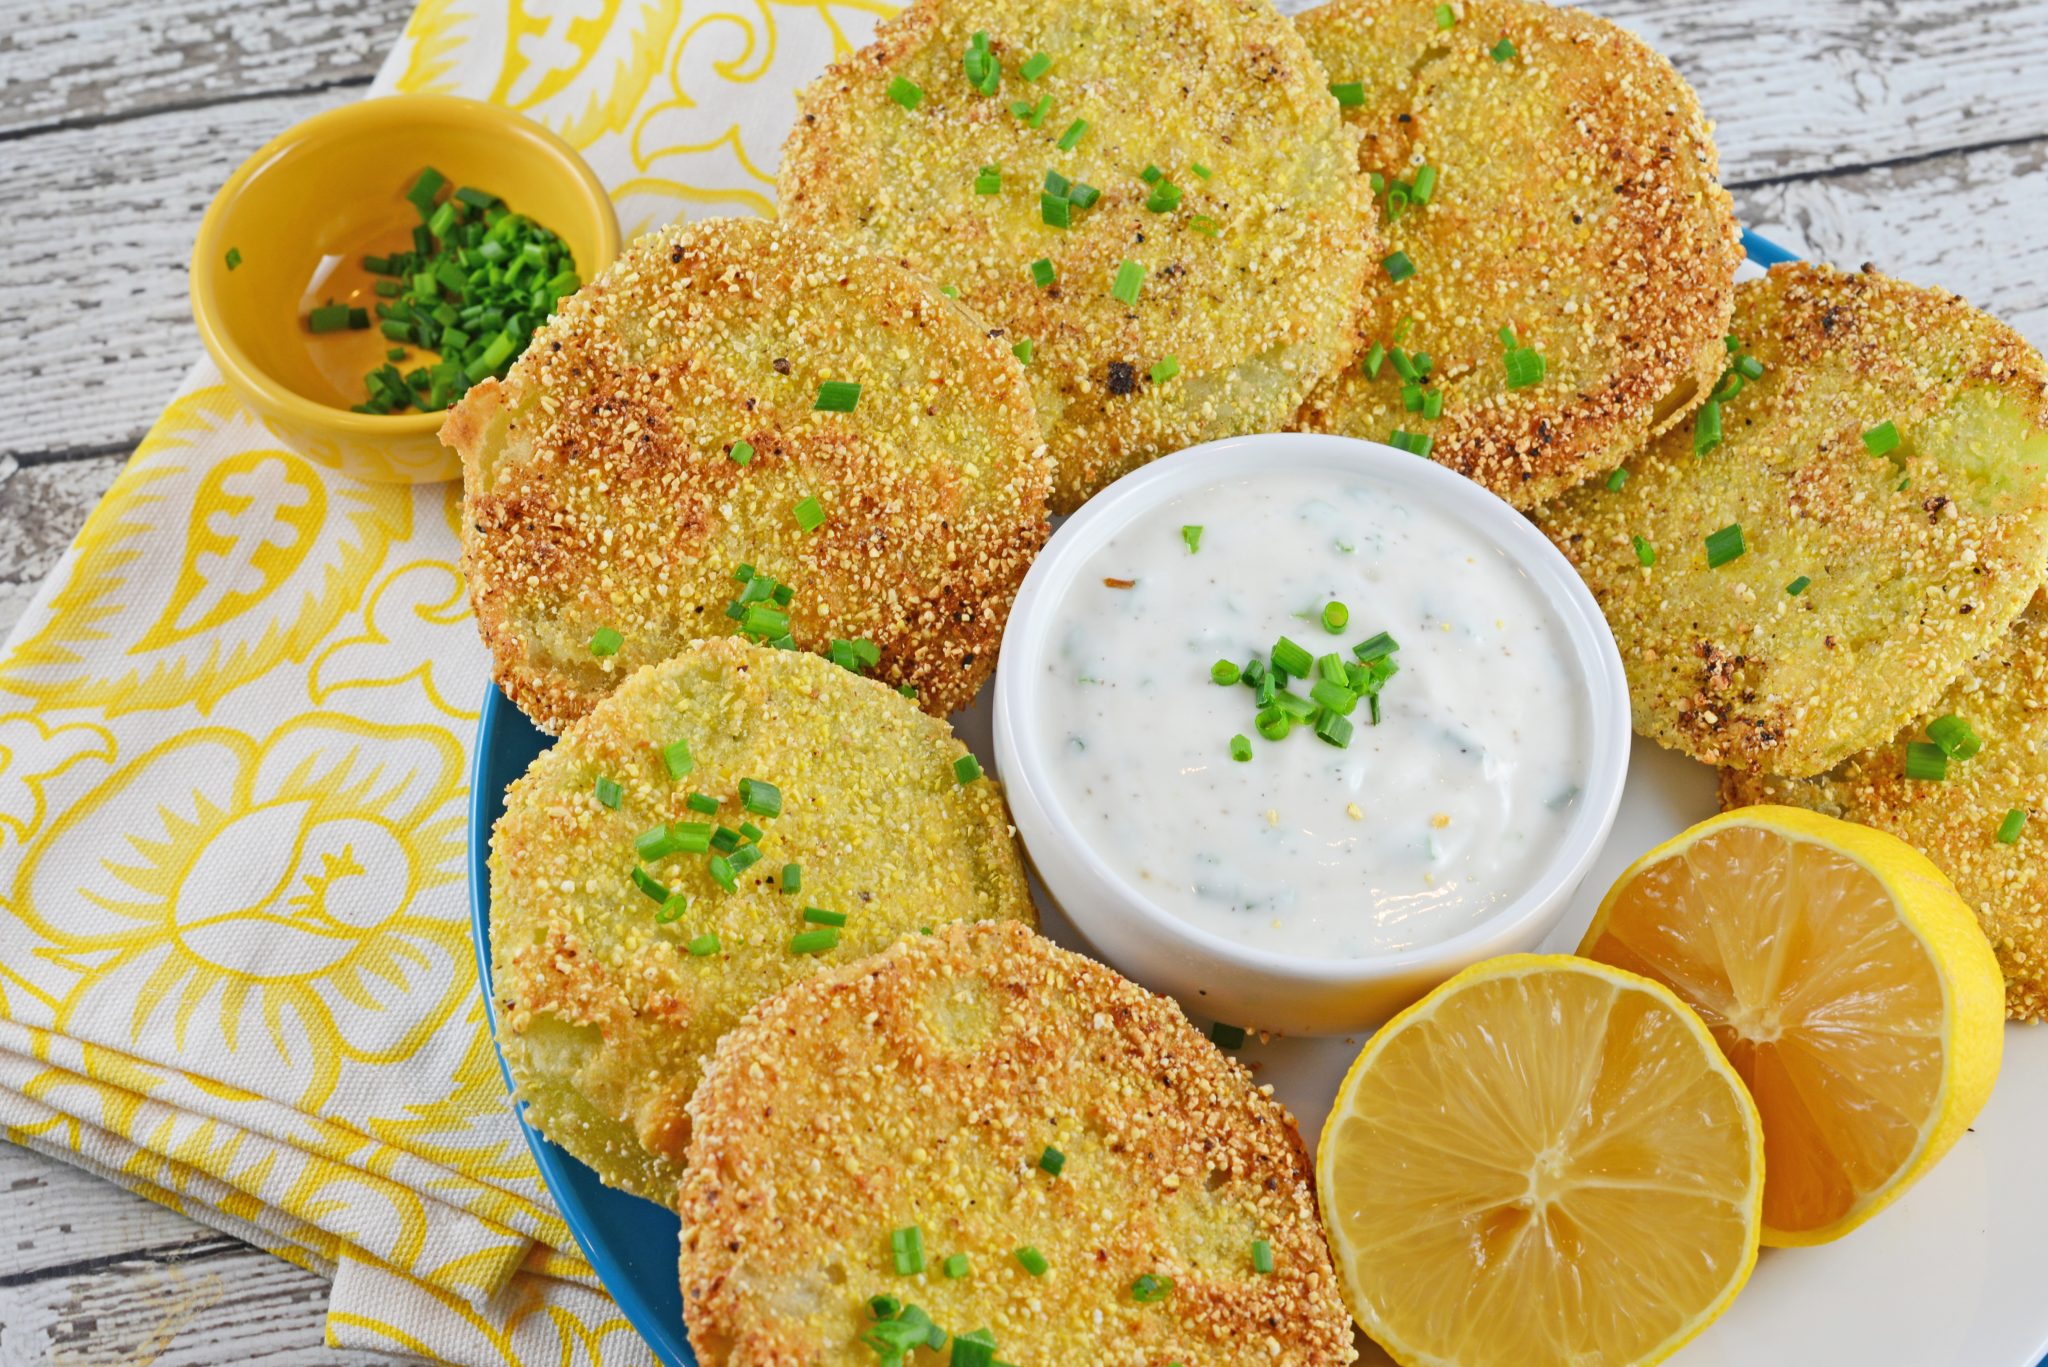 Fried Green Tomatoes Recipe - How To Make Fried Green Tomatoes